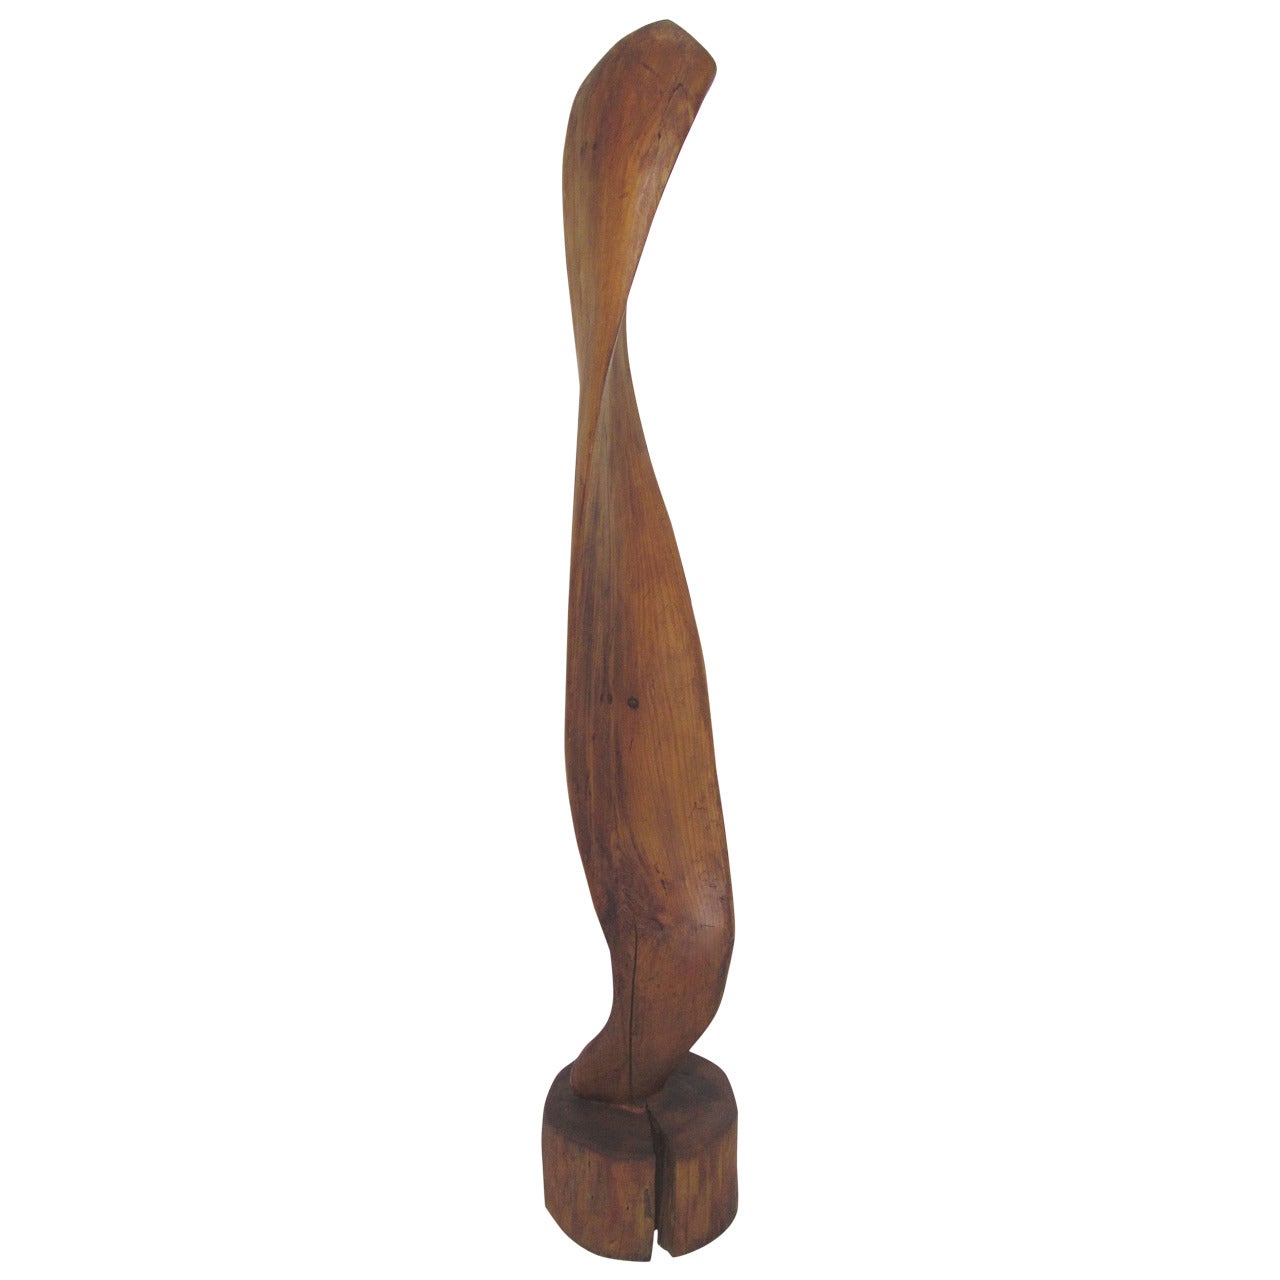 Abstract Hand-Carved Wood Five Foot Floor Sculpture by F. Neal Eddy, Dated 1979